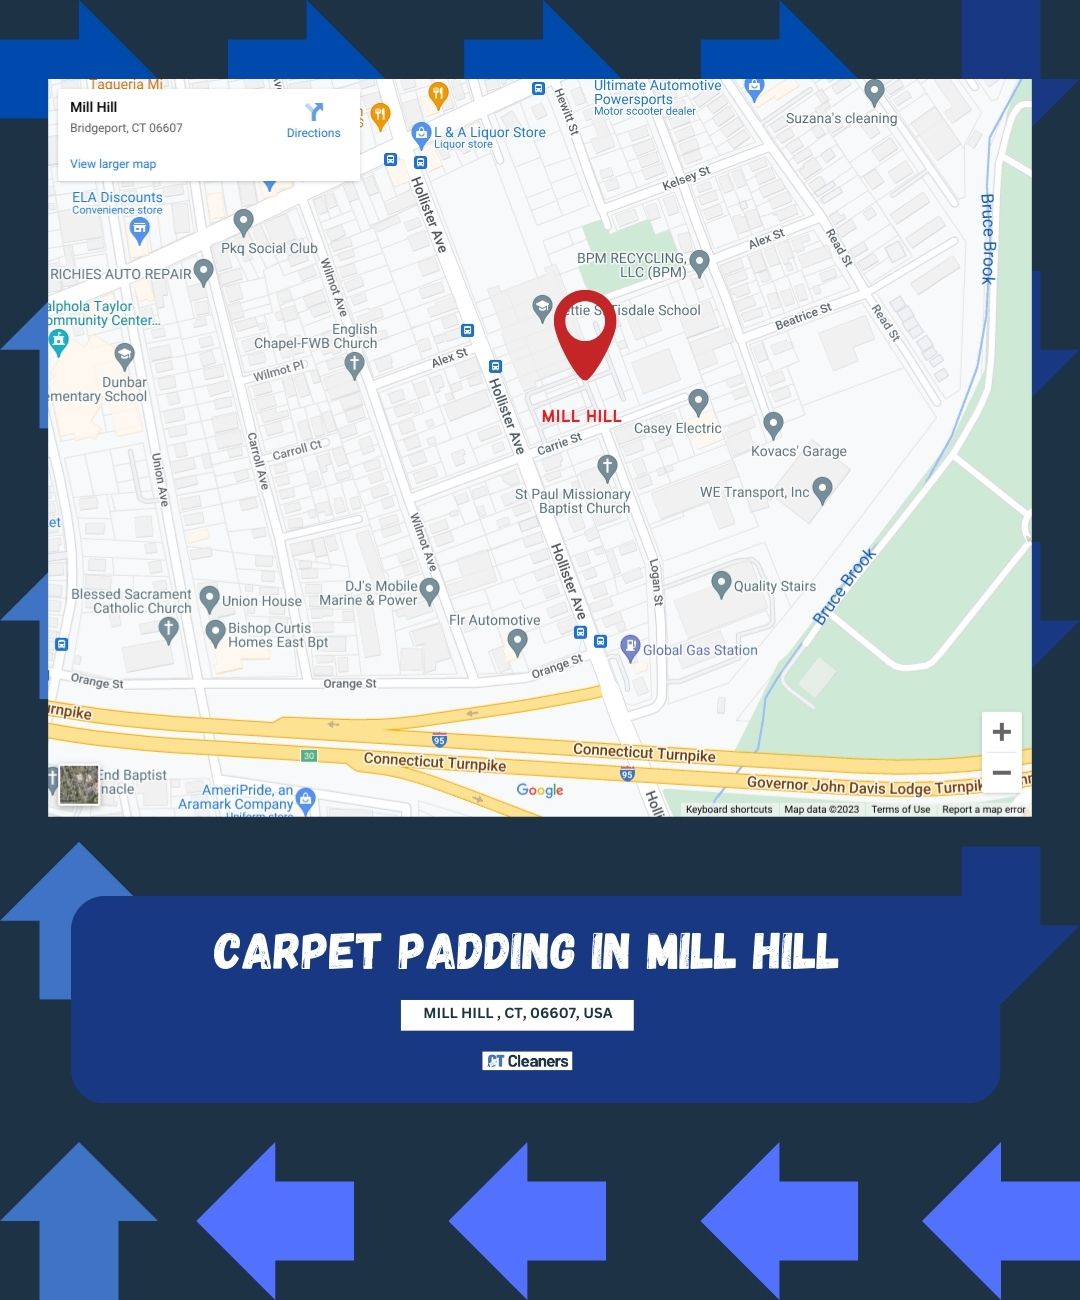 Carpet Padding in Mill Hill Map